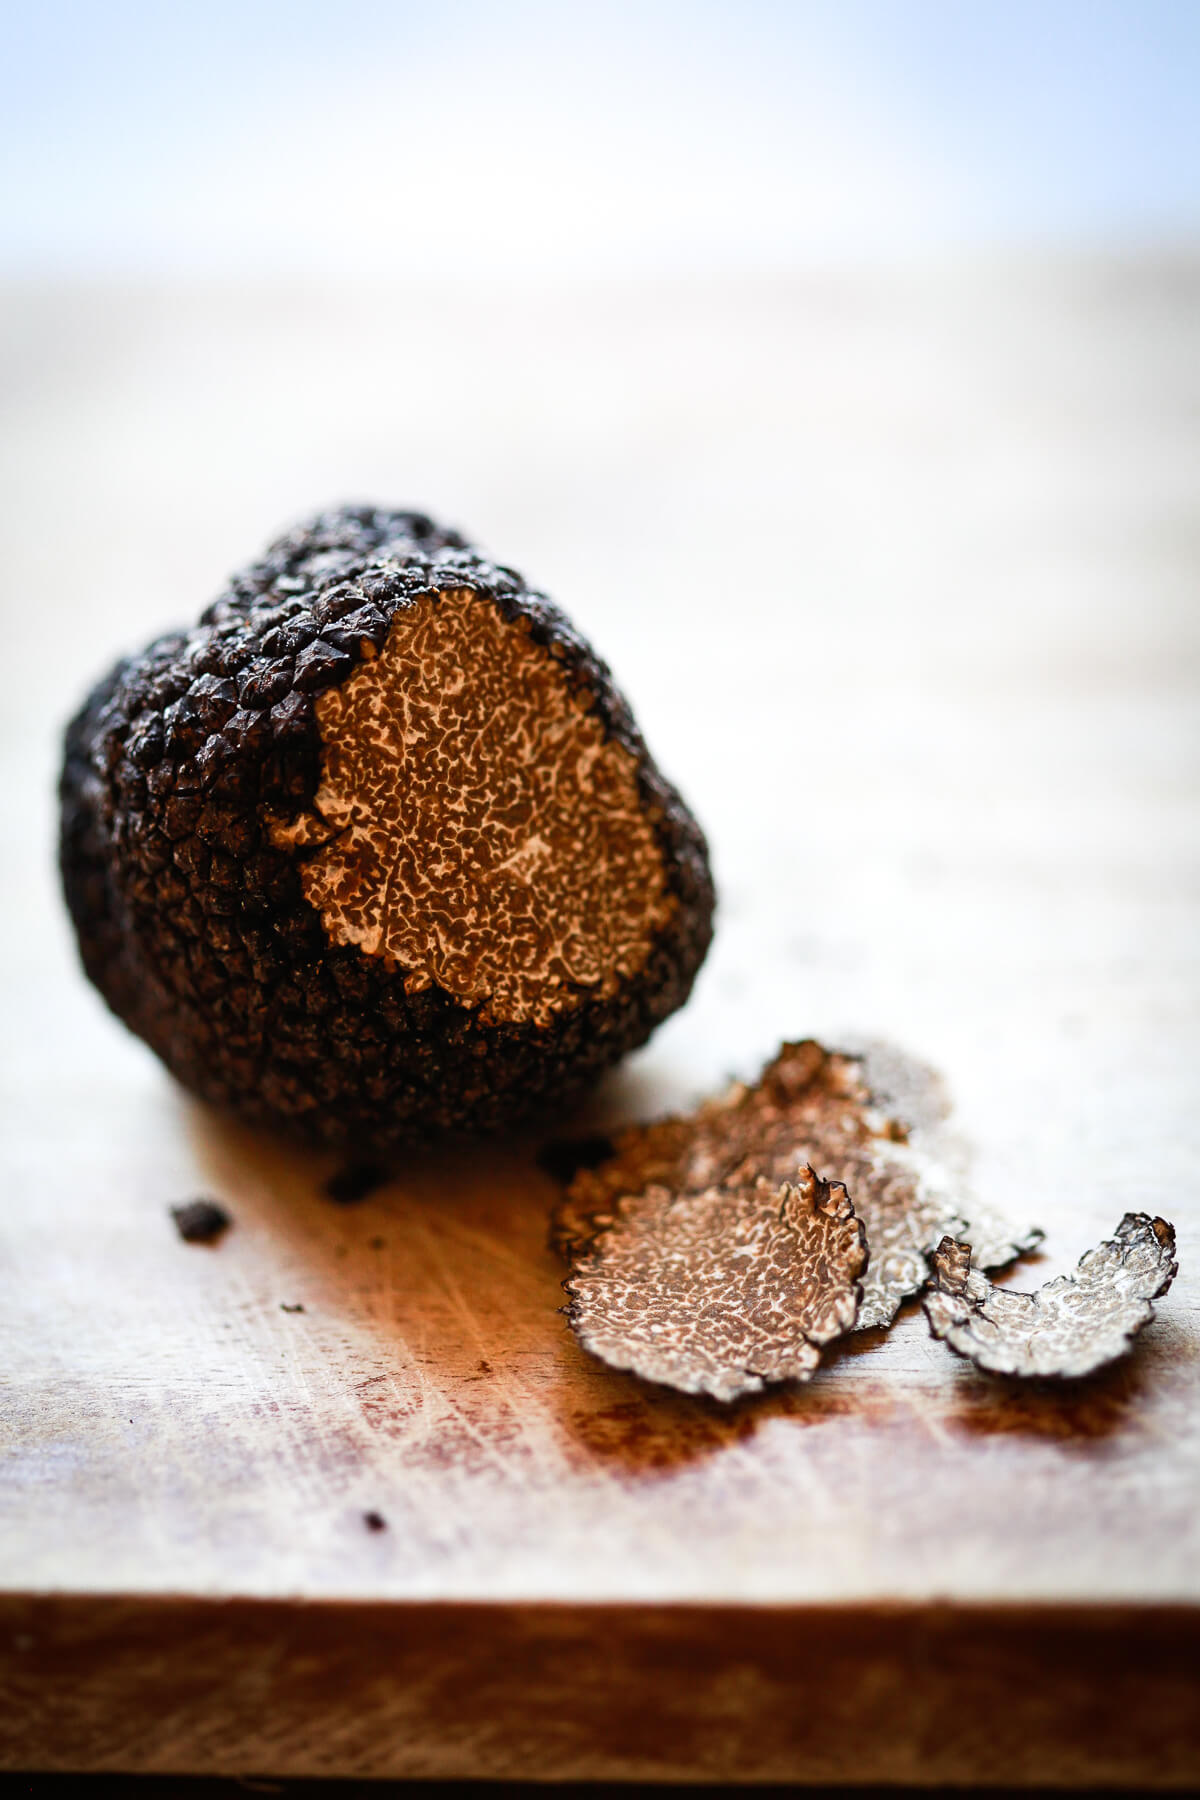 A fresh black truffle sits on a wooden cutting board. A few thin pieces have been shaved off to reveal a marbled interior. 